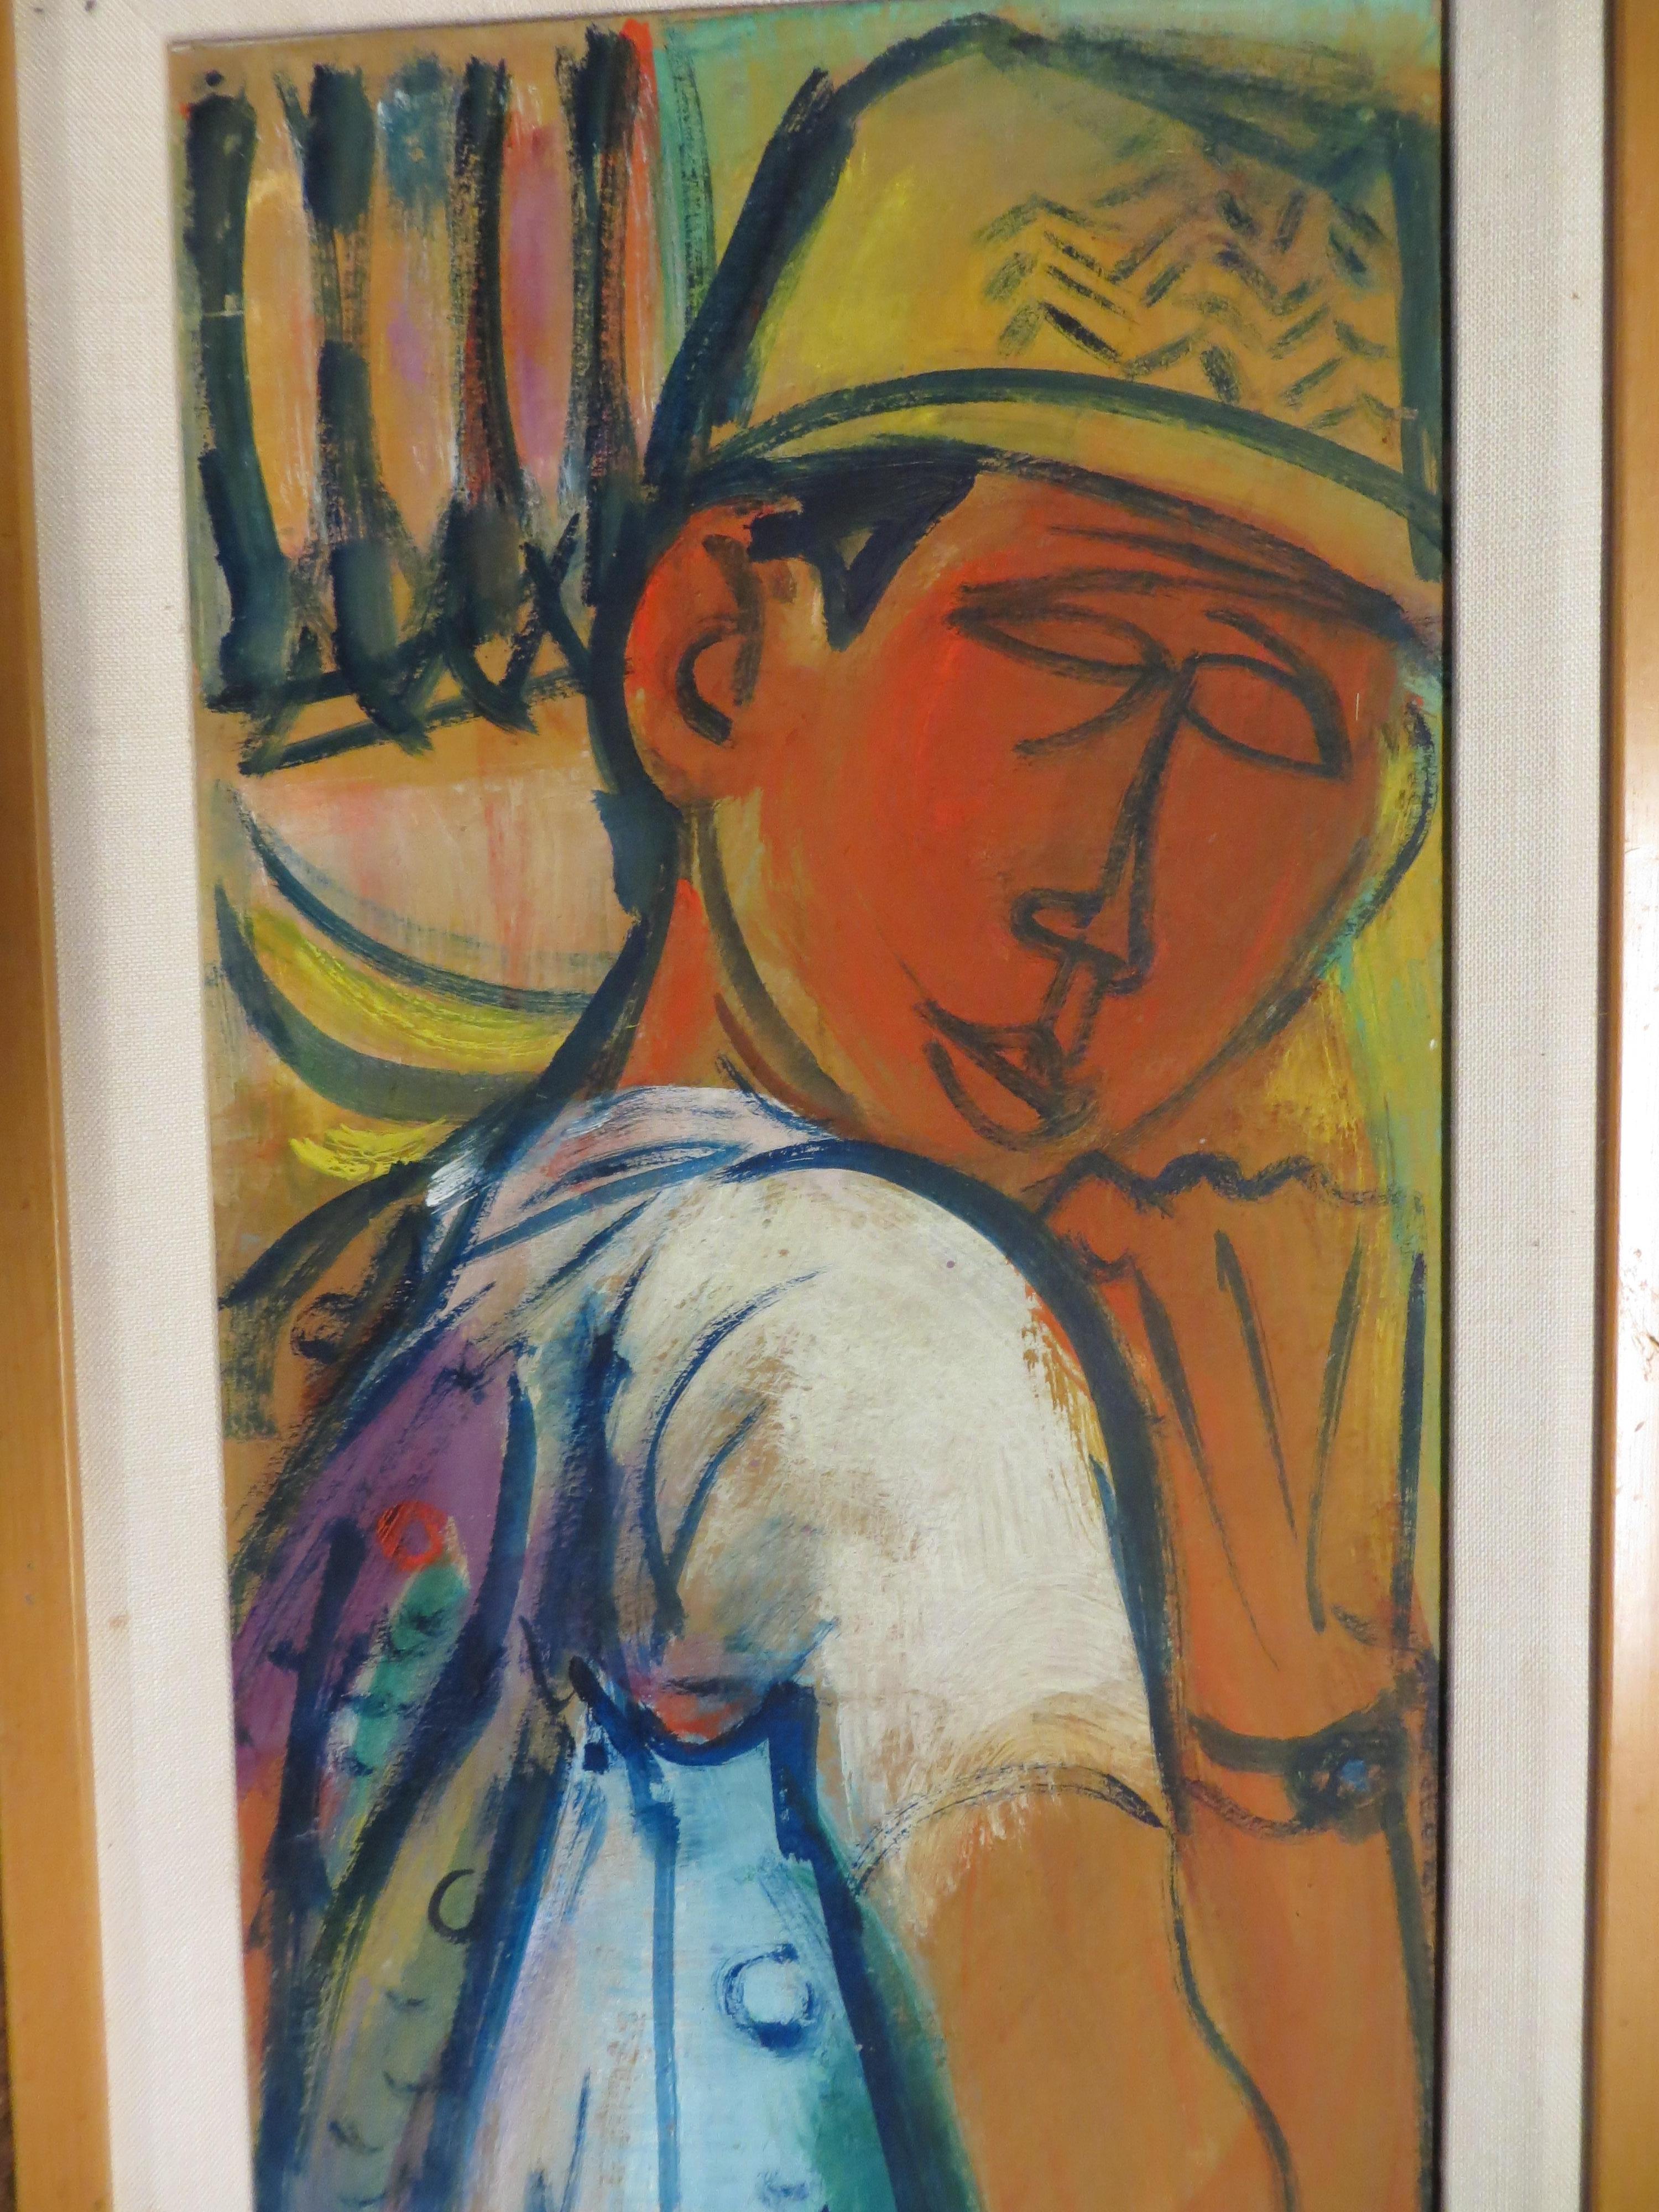 Oil on panel representing a fisherman in the style of cubist painting. Typical painting of mid-century Californian painting .